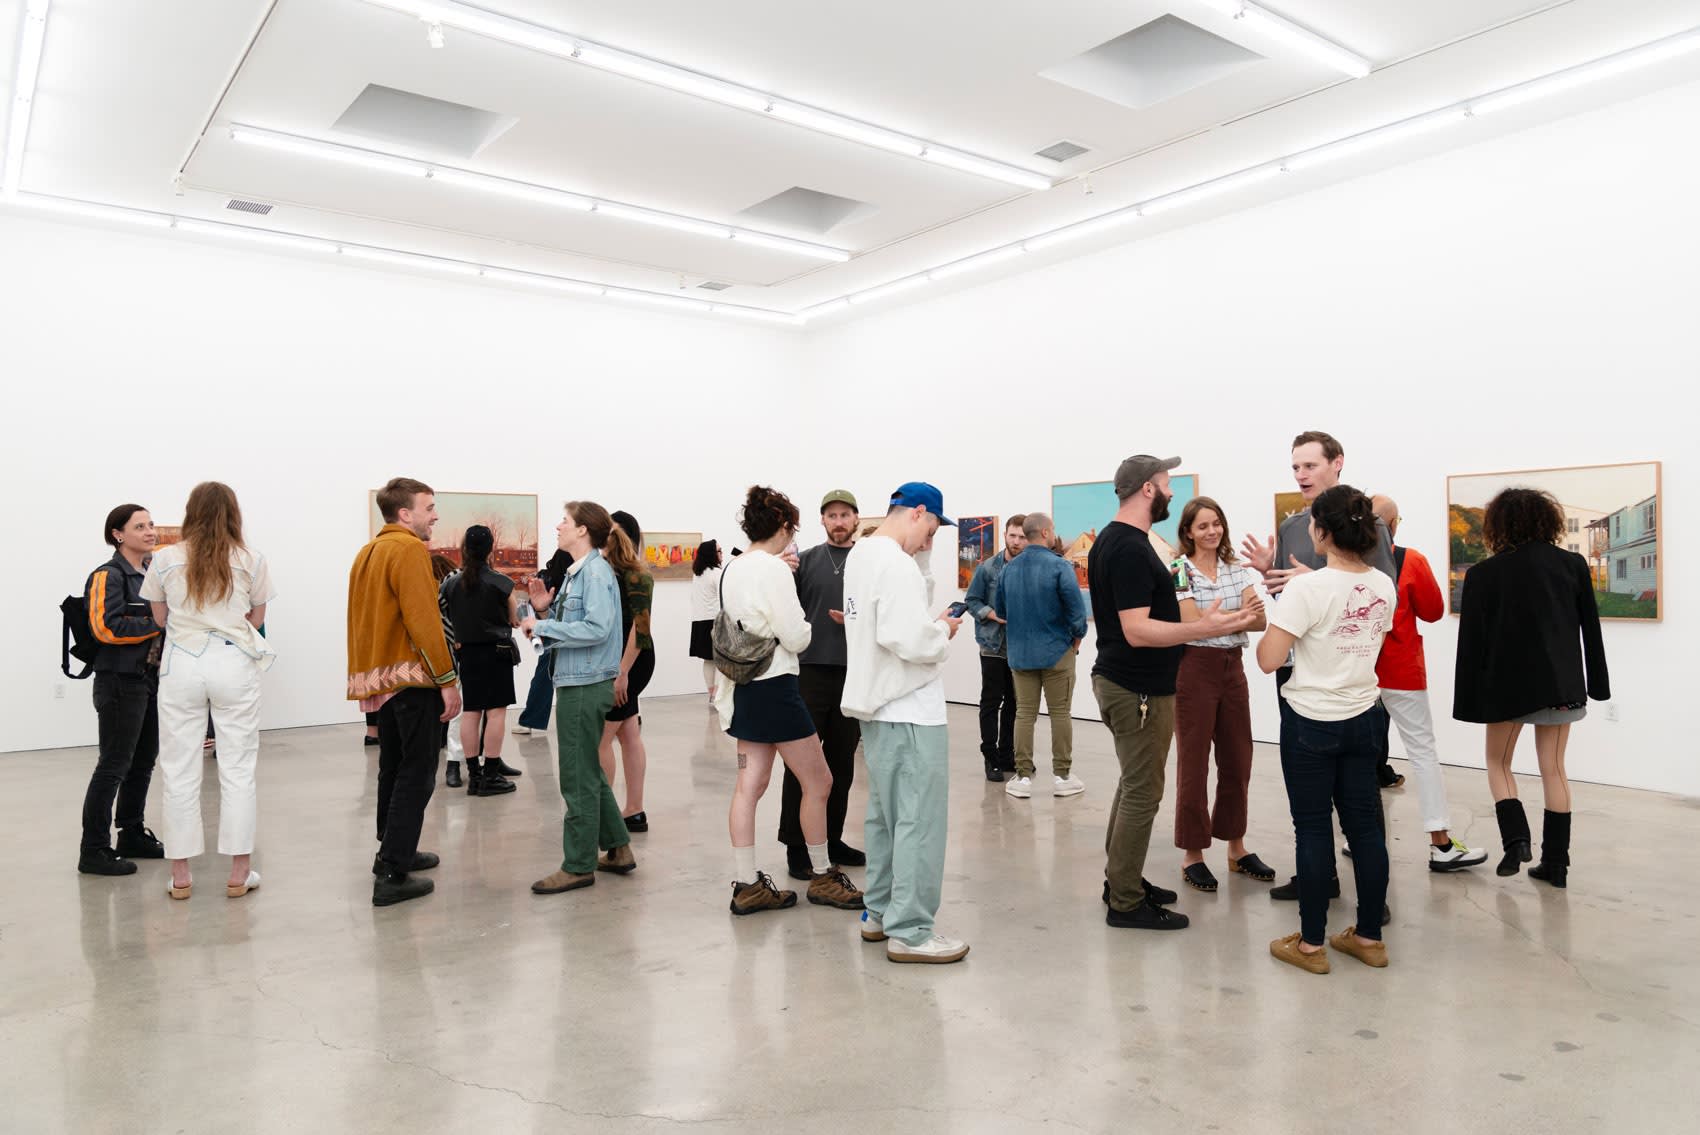 A large crowd of people stand in an art gallery with white walls and a concrete floor at the opening of Pat Perry's solo show which world. 